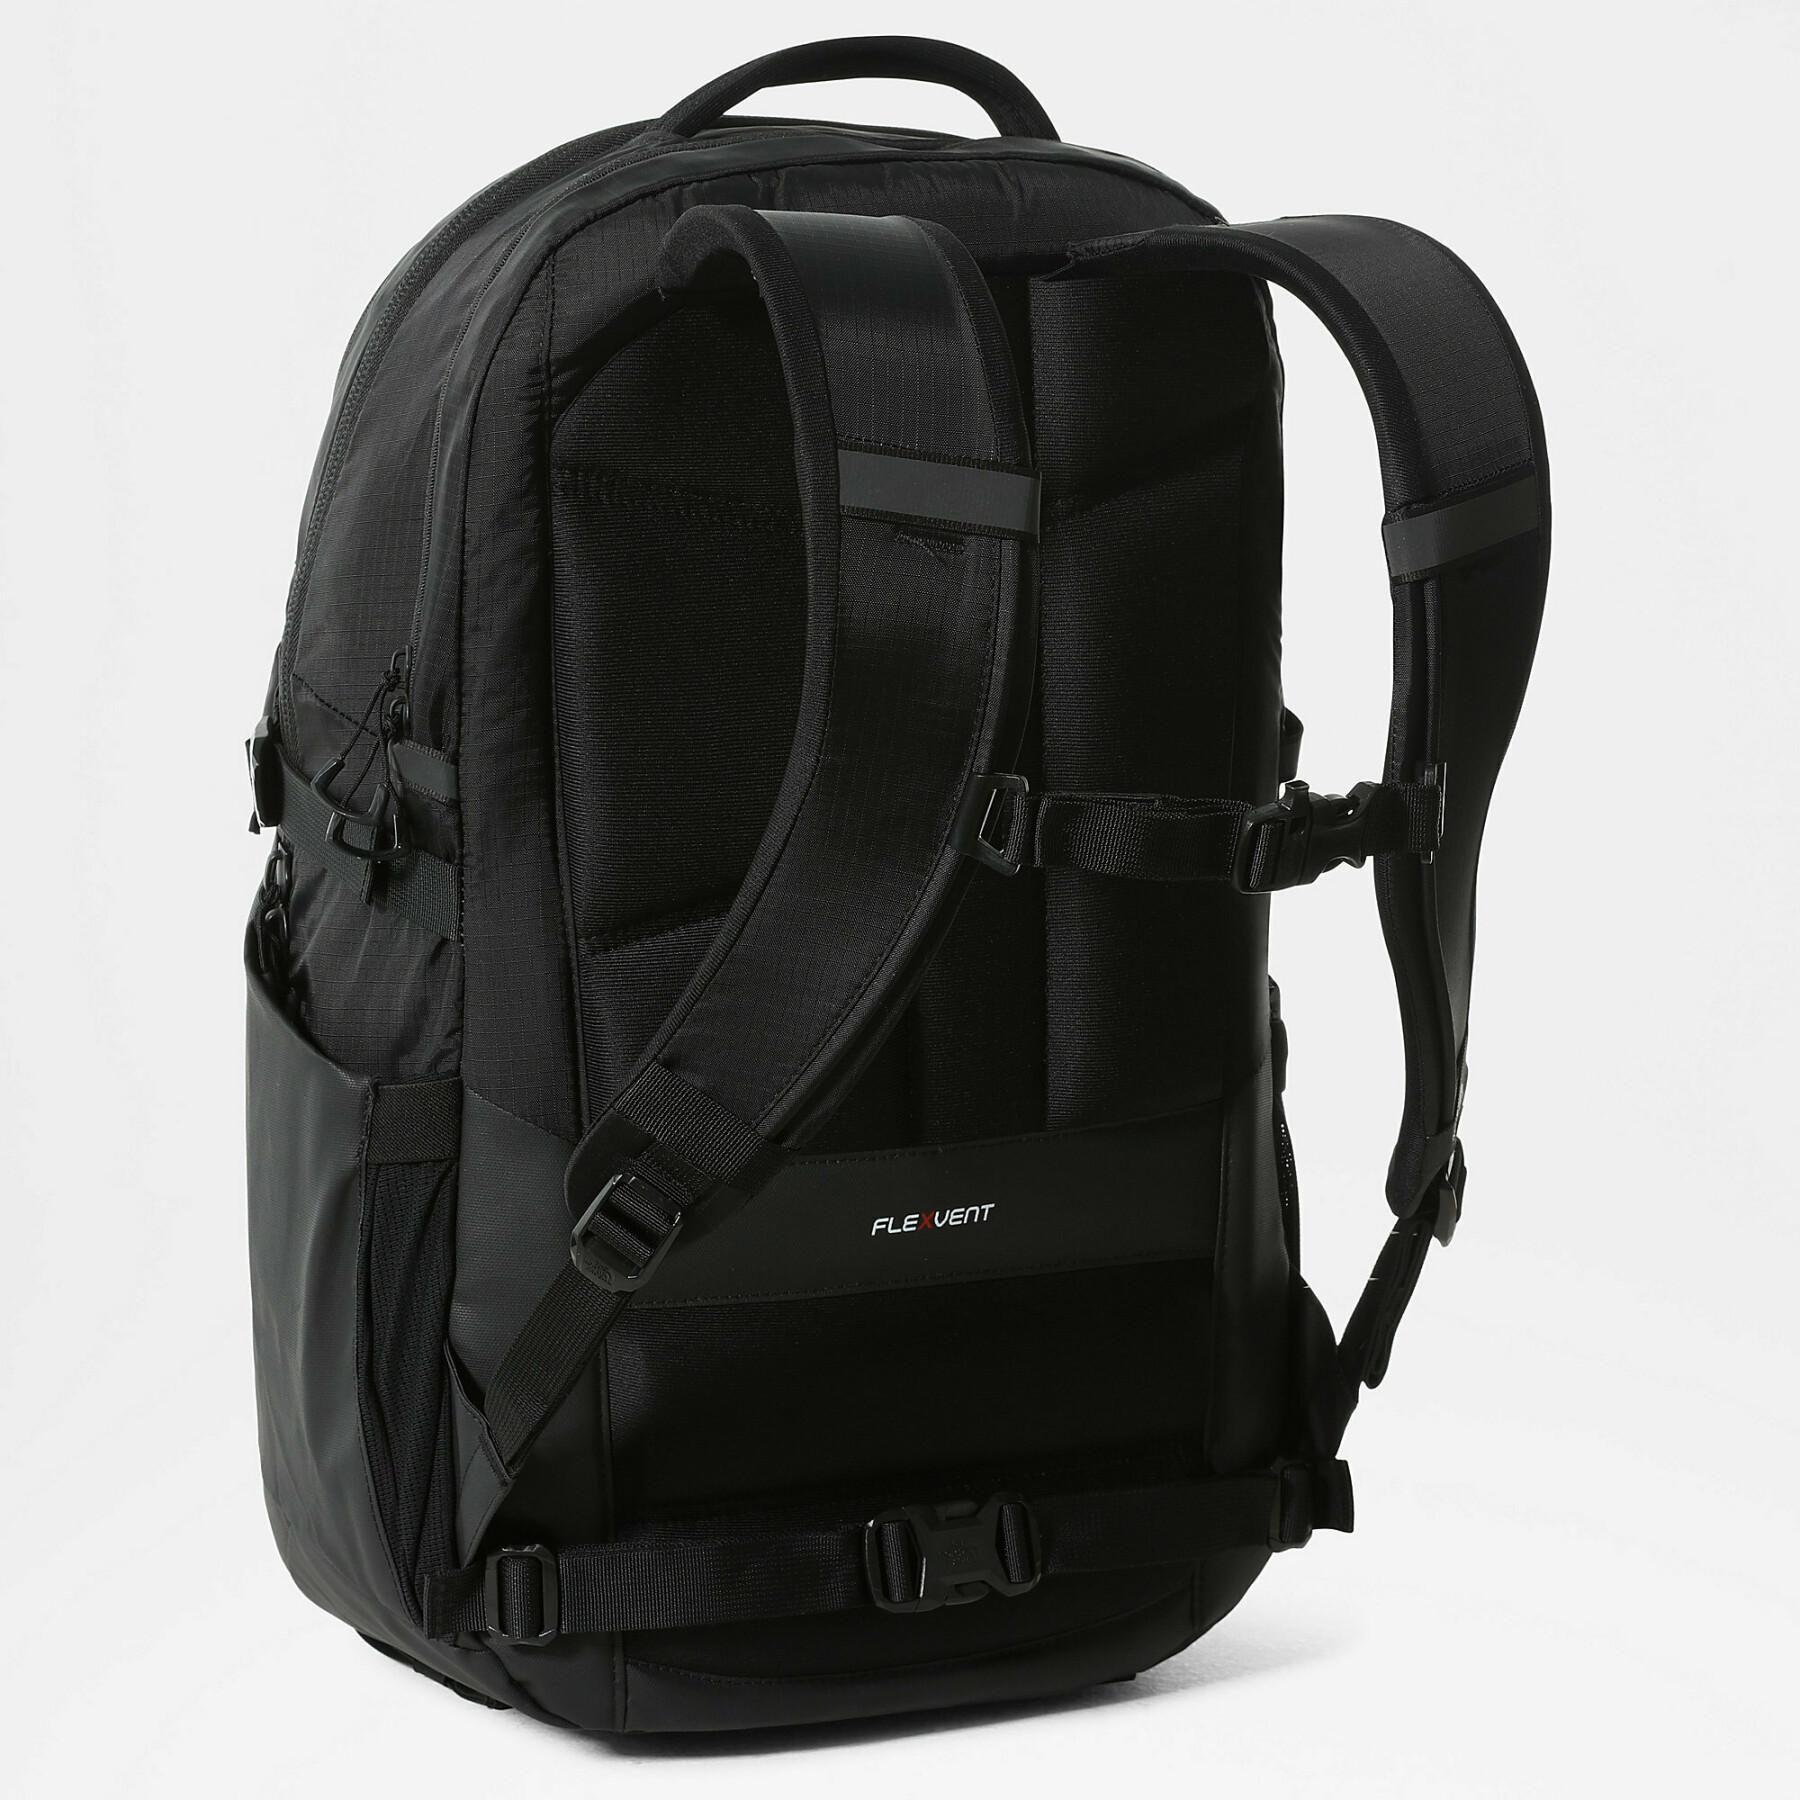 Sac à dos The North Face Router